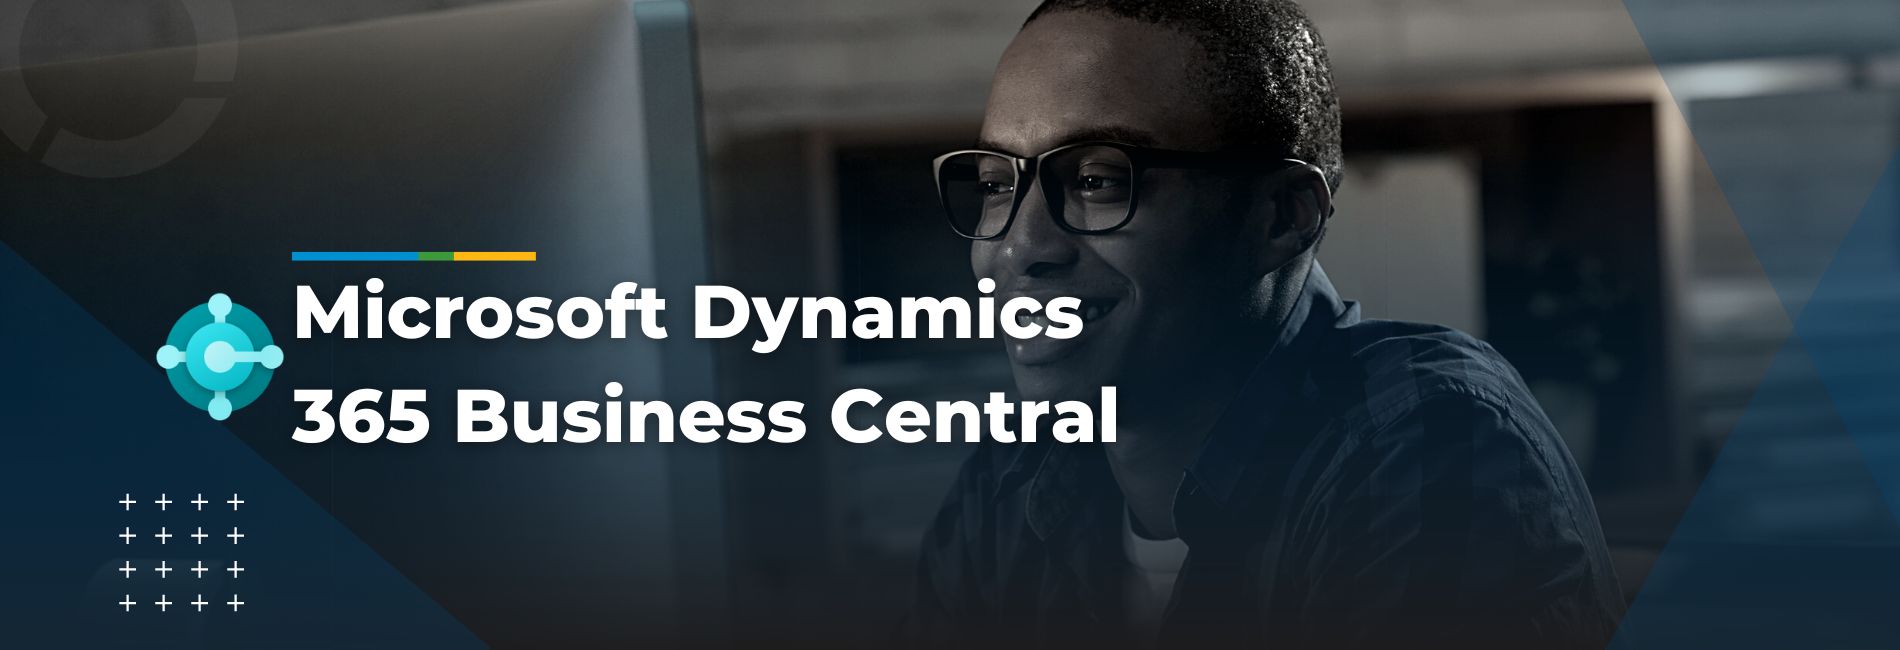 Banner do Dynamics 365 Business Central